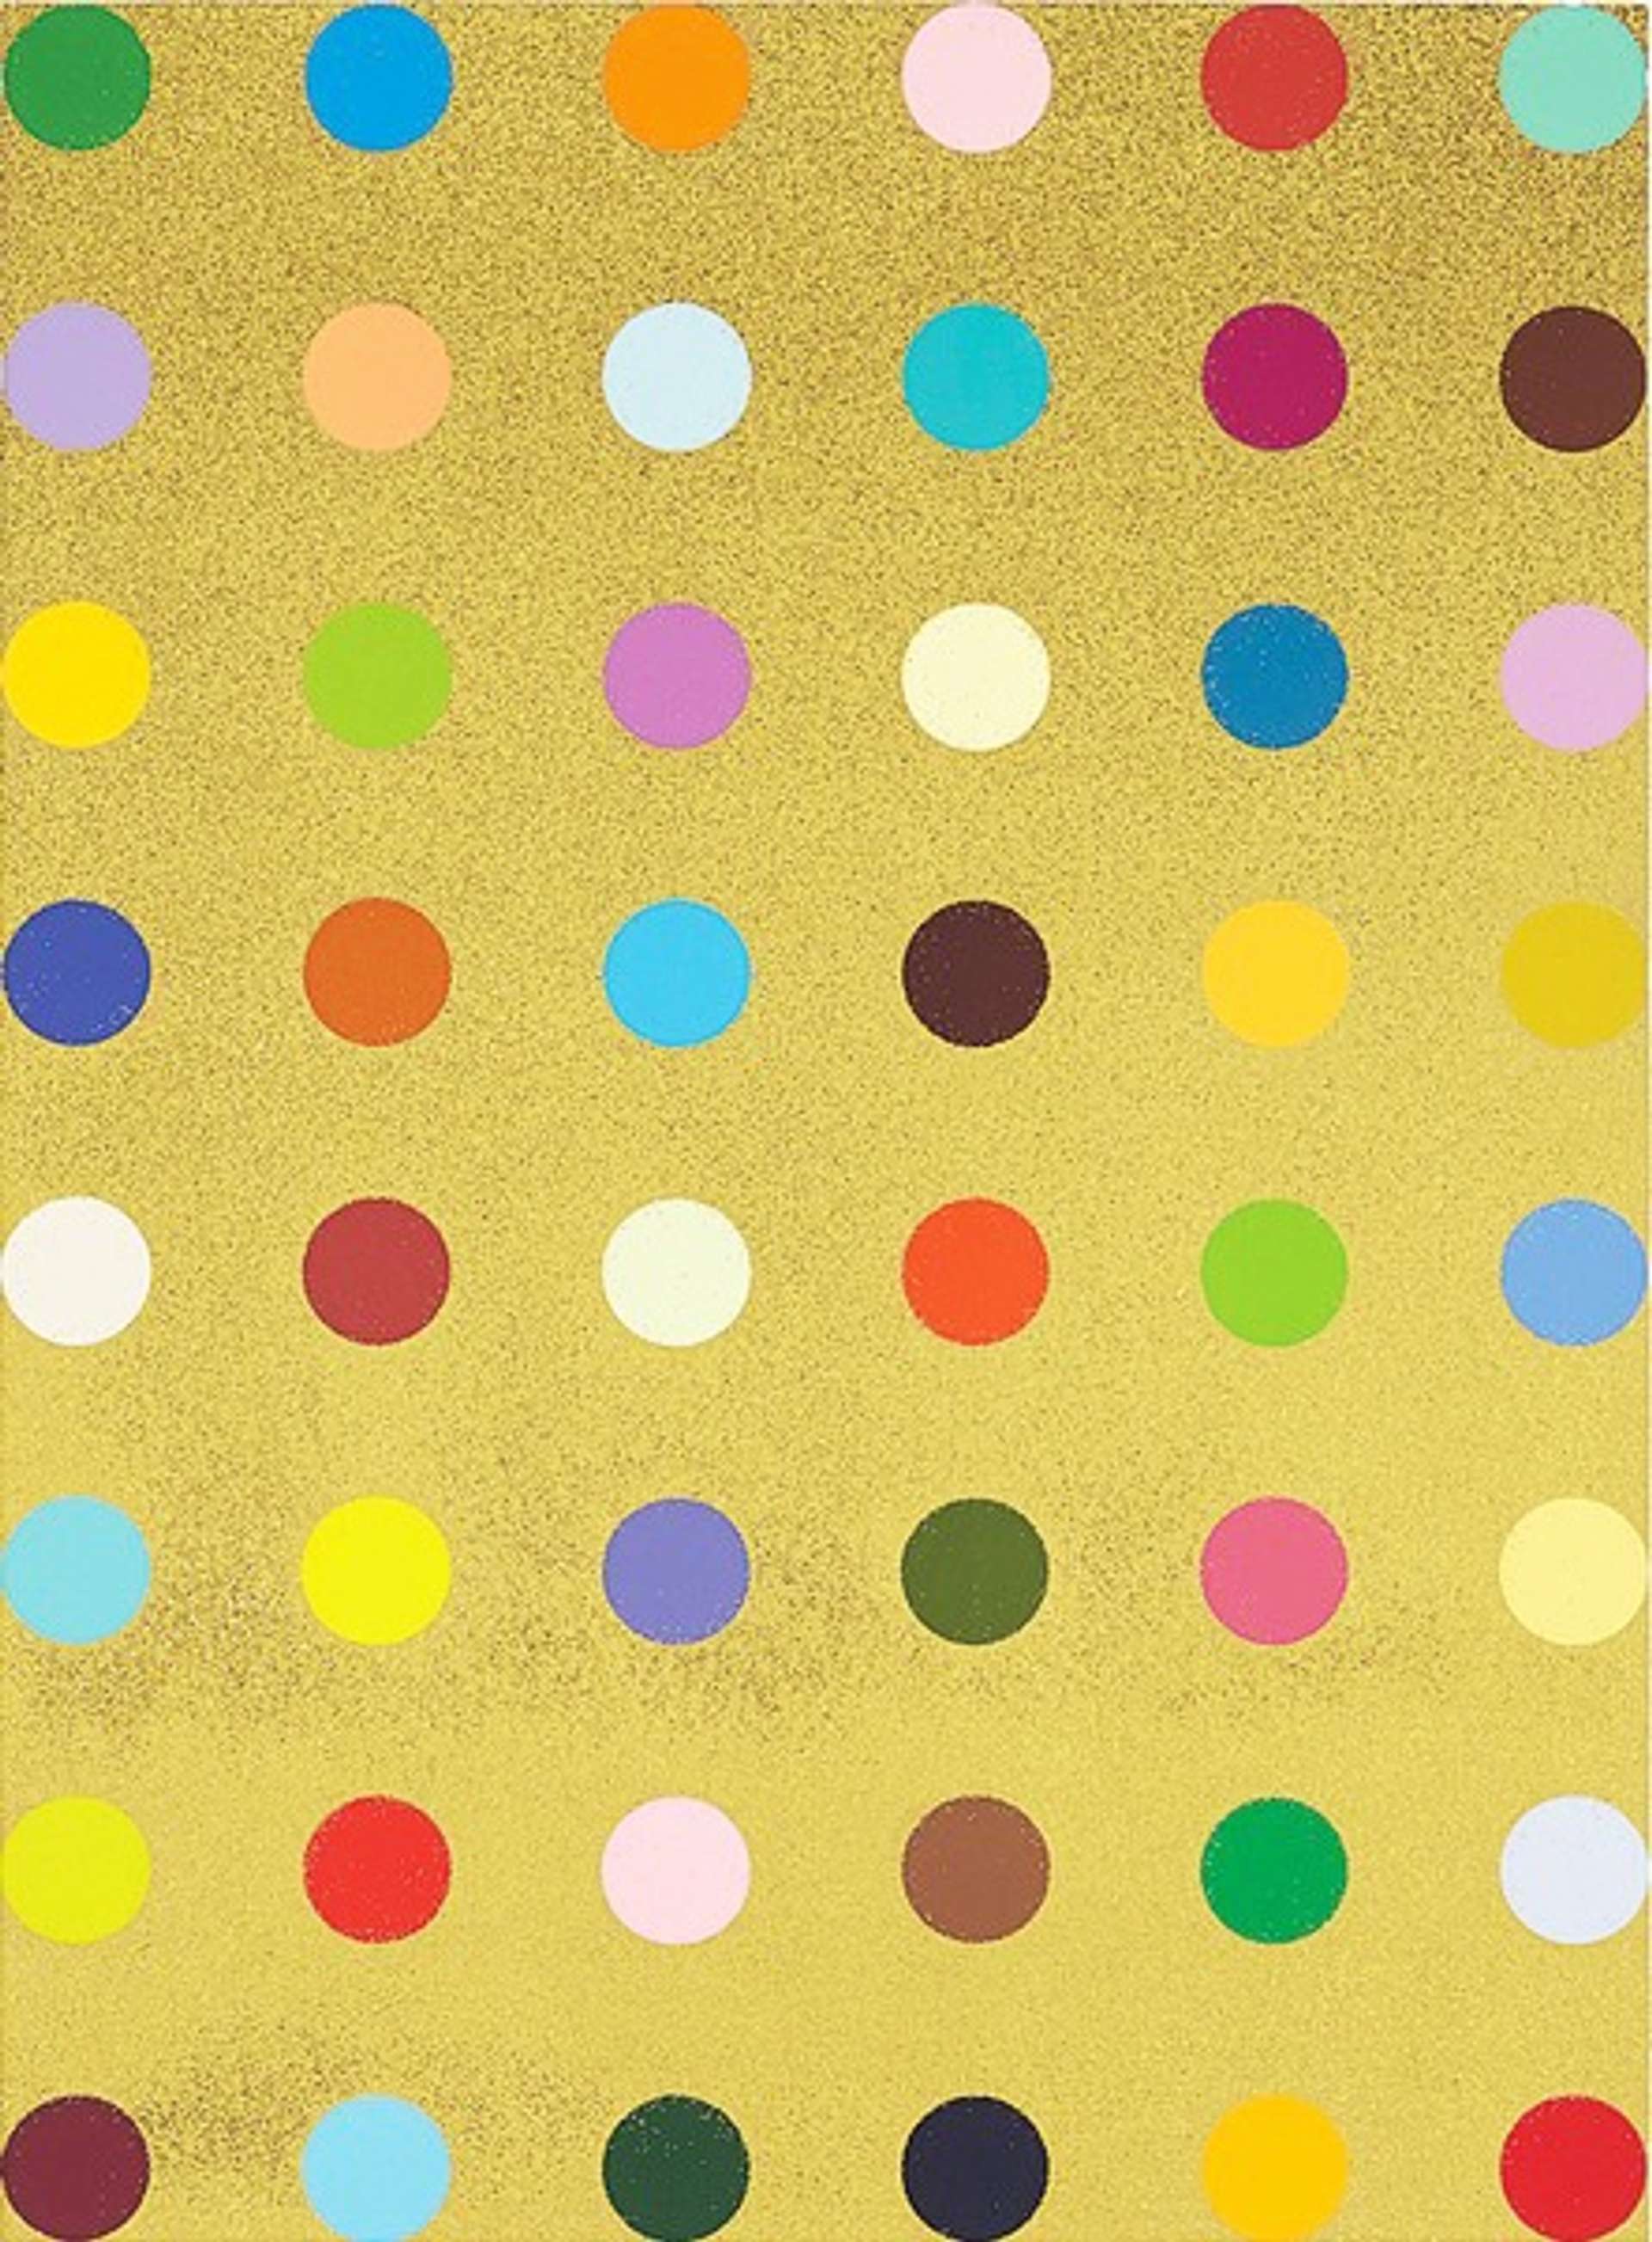 Aurous Iodide by Damien Hirst